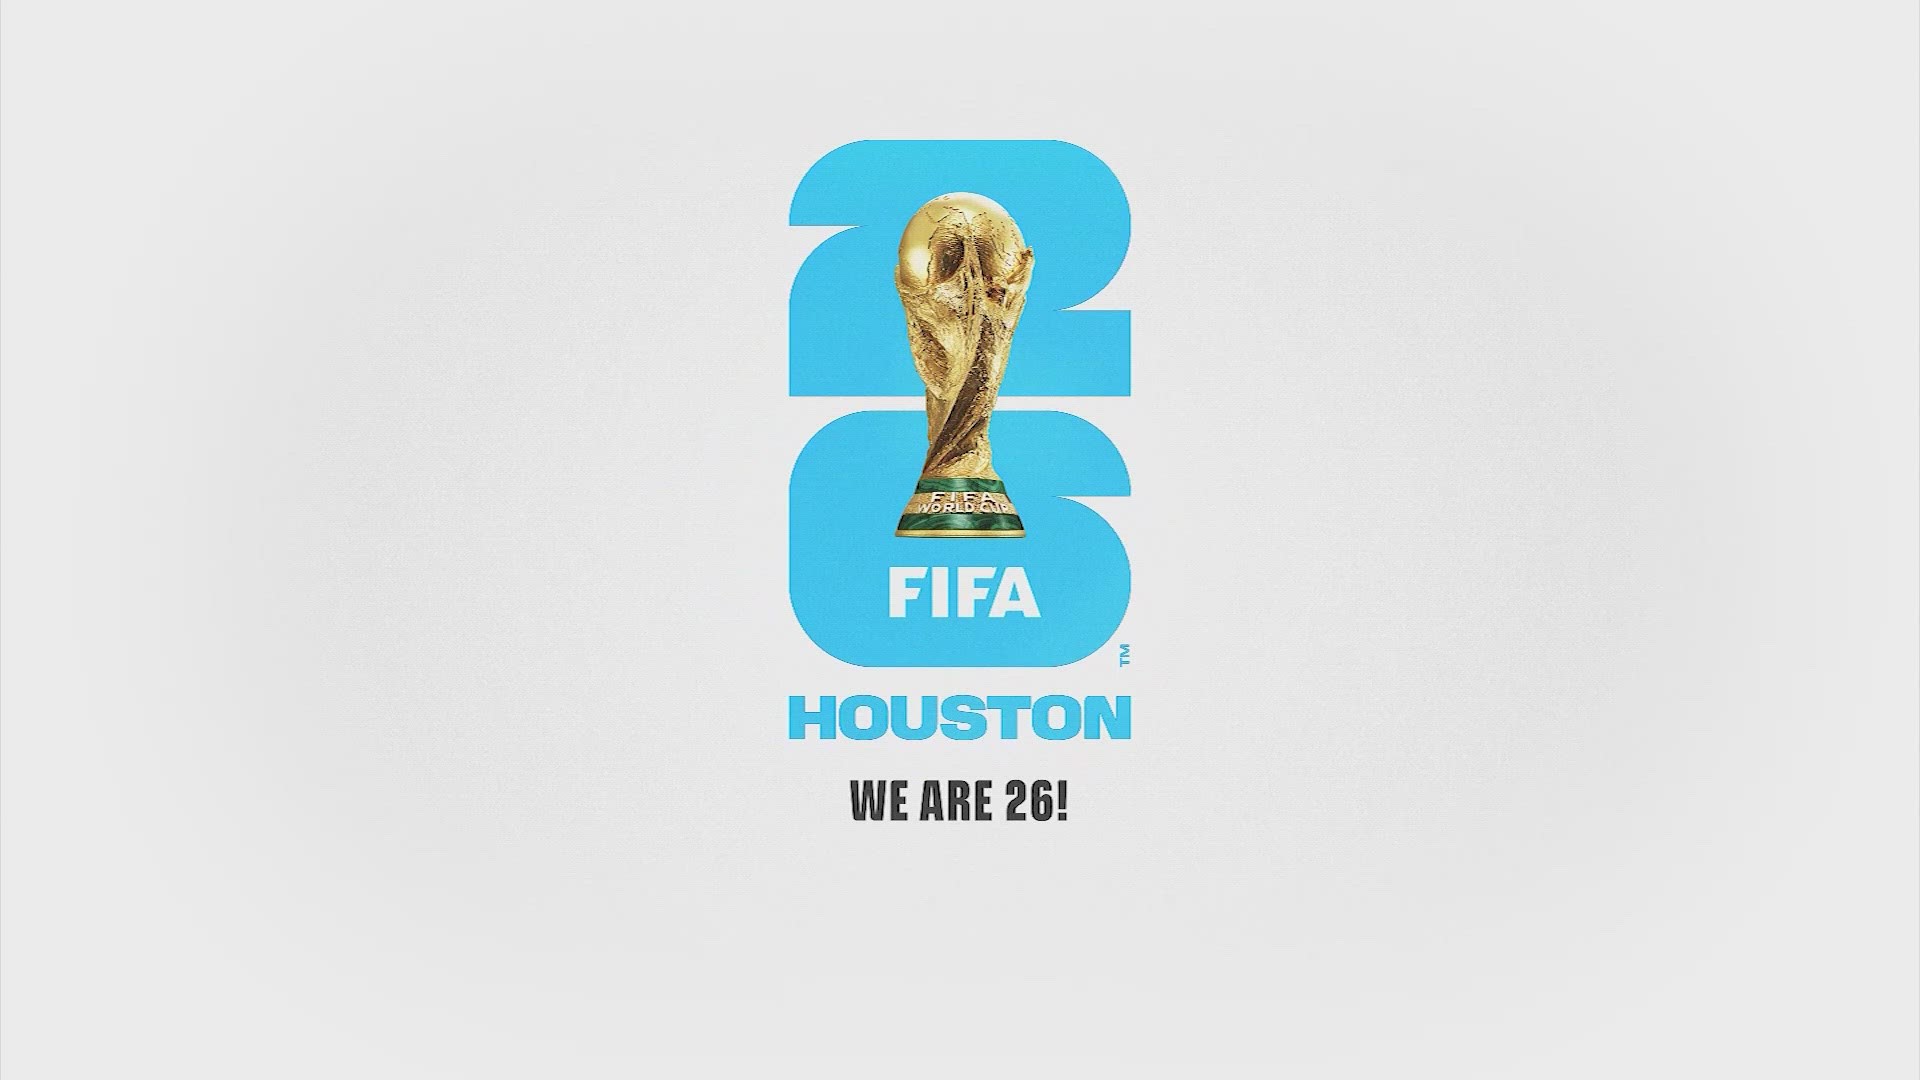 The new logo was released overnight, and the excitement is building in Houston and around the world.